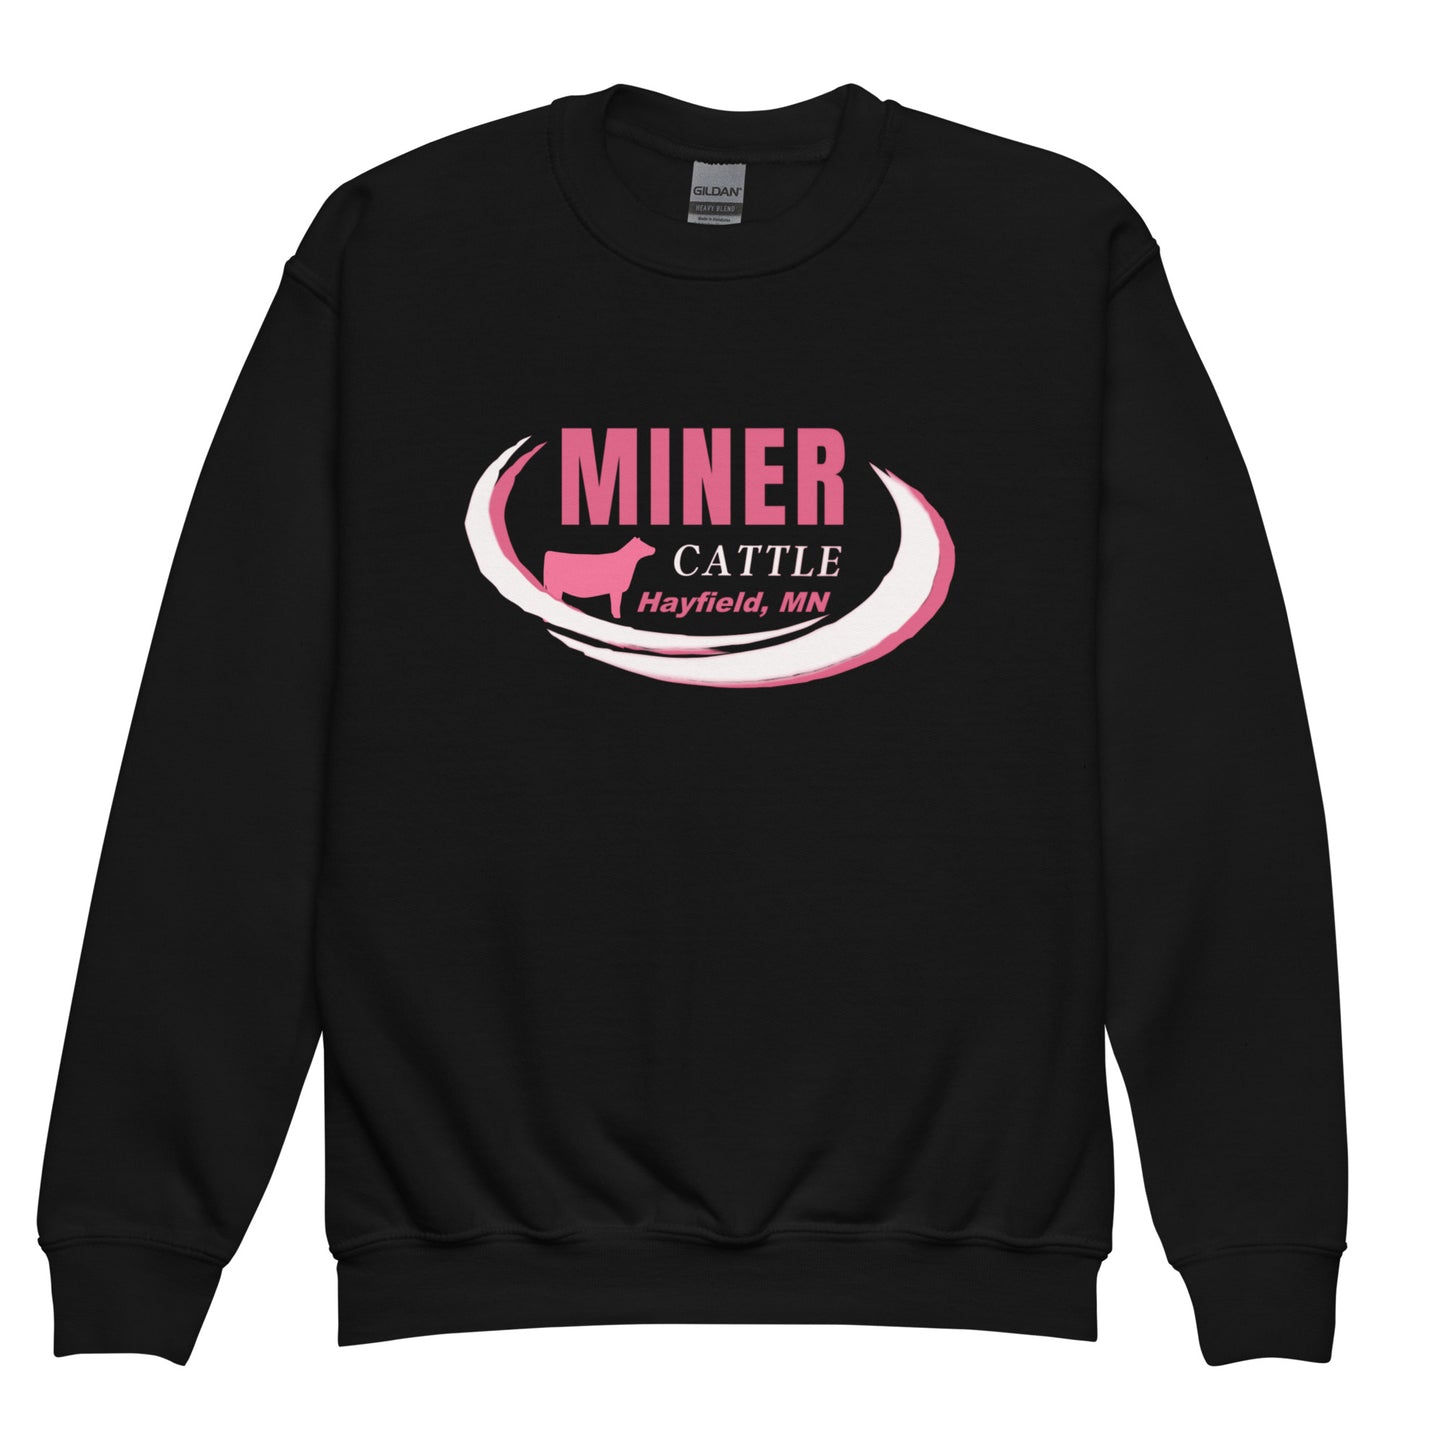 MINER CATTLE- YOUTH CREWNECK (PINK LOGO)